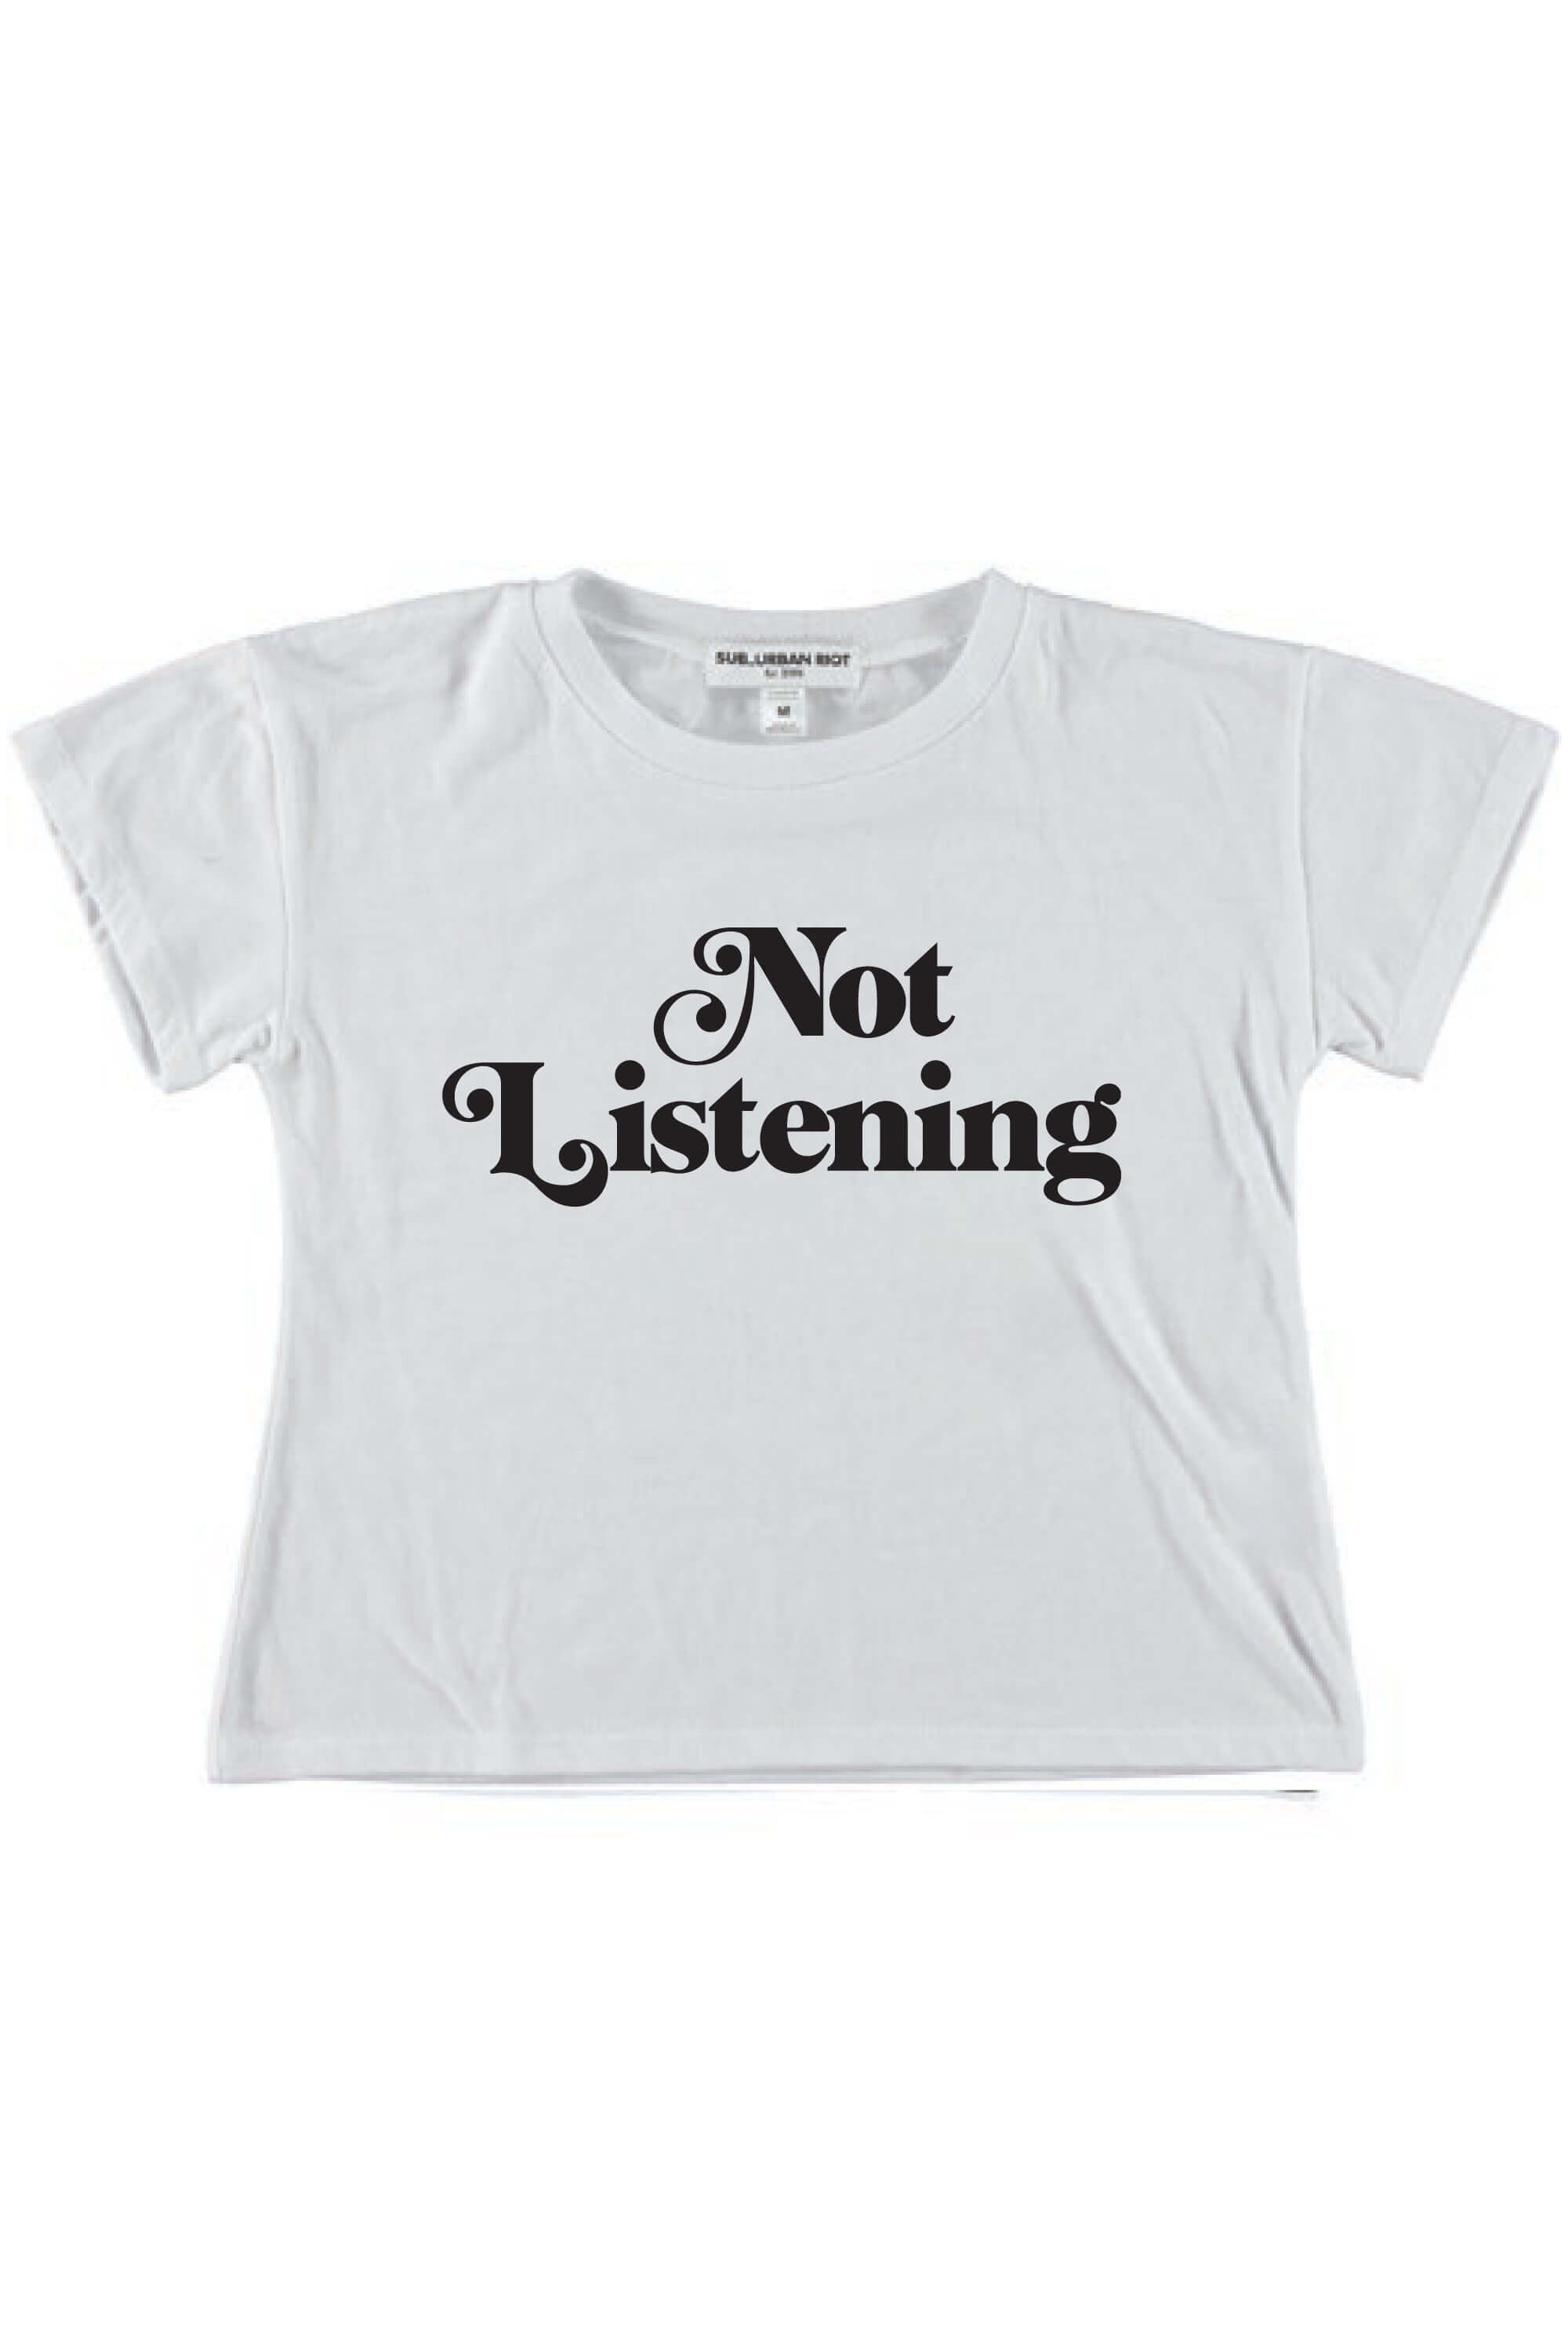 NOT LISTENING YOUTH SIZE CROP TEE